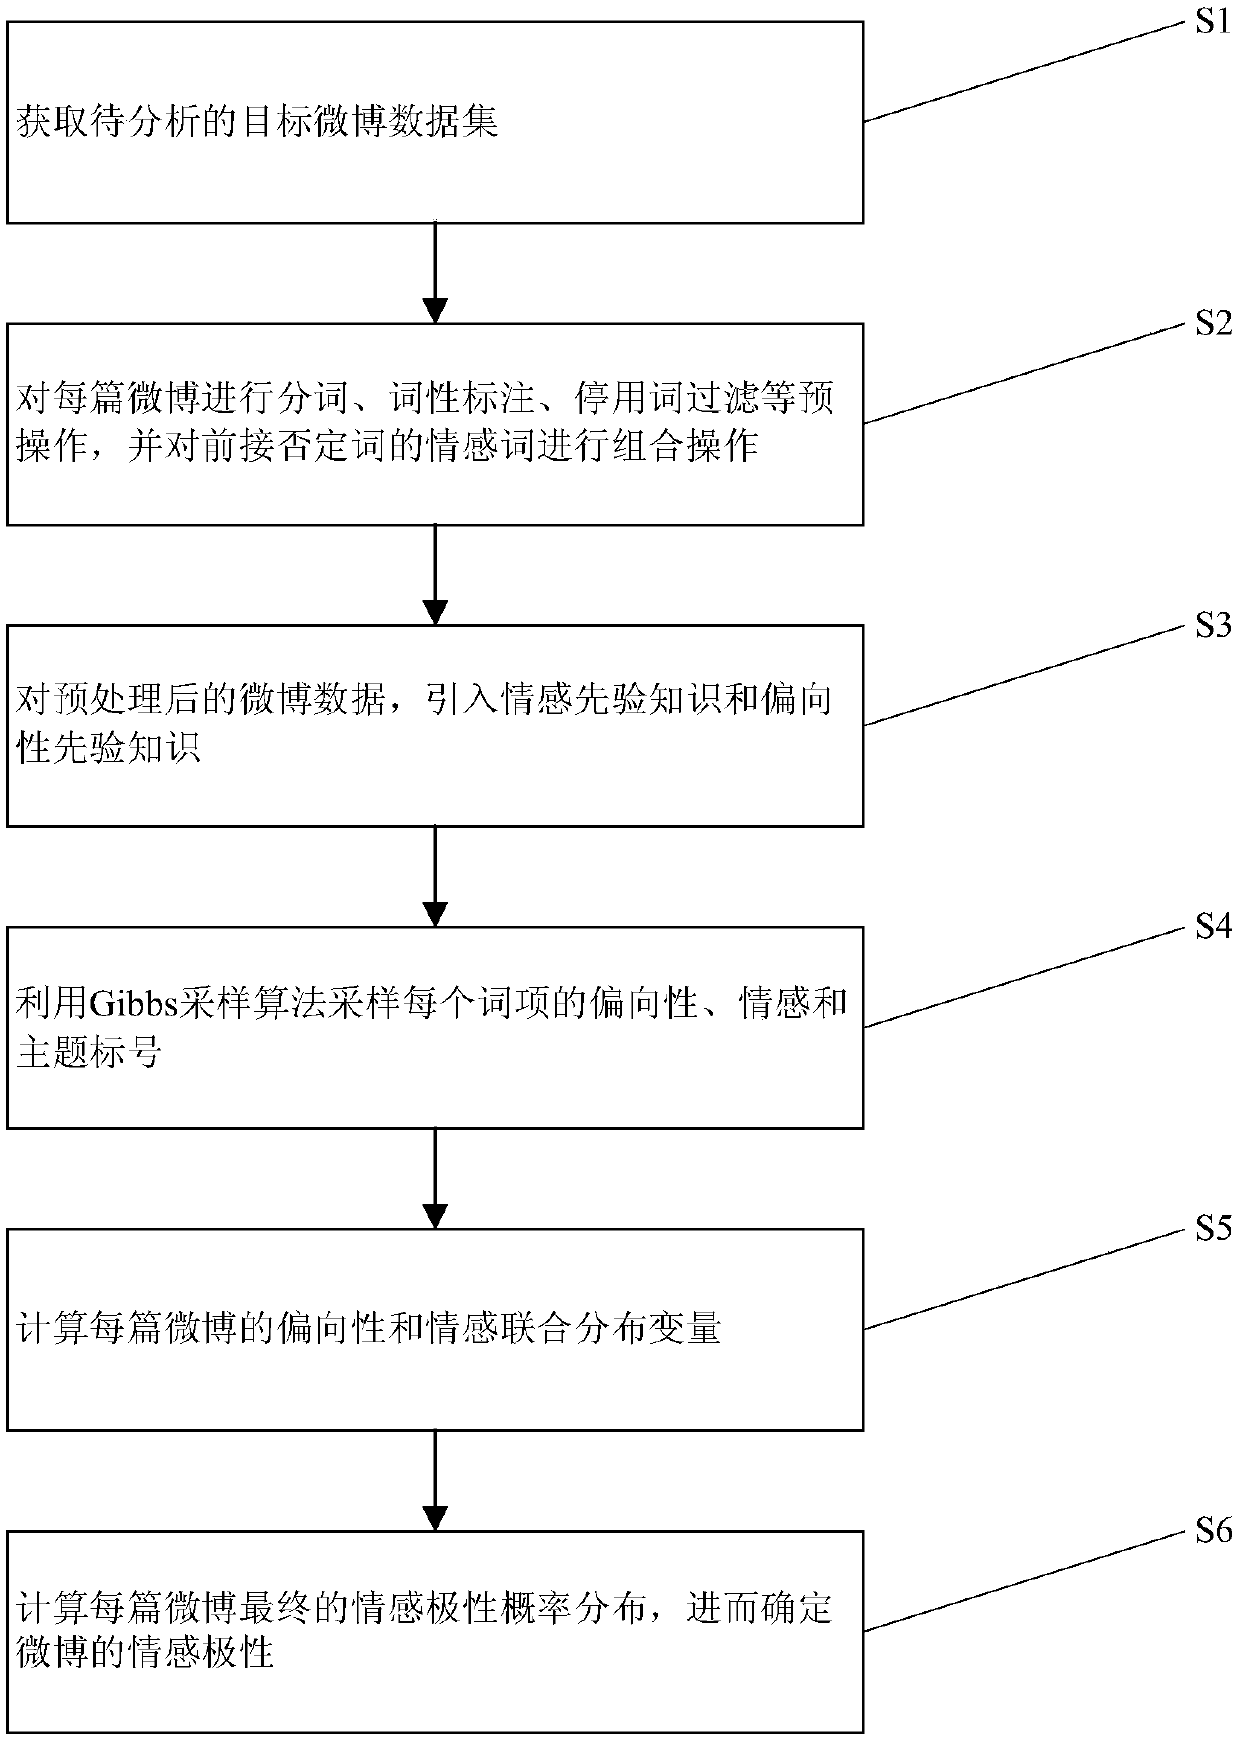 Chinese weibo sentiment analysis method based on lexical item subjective and objective directivity